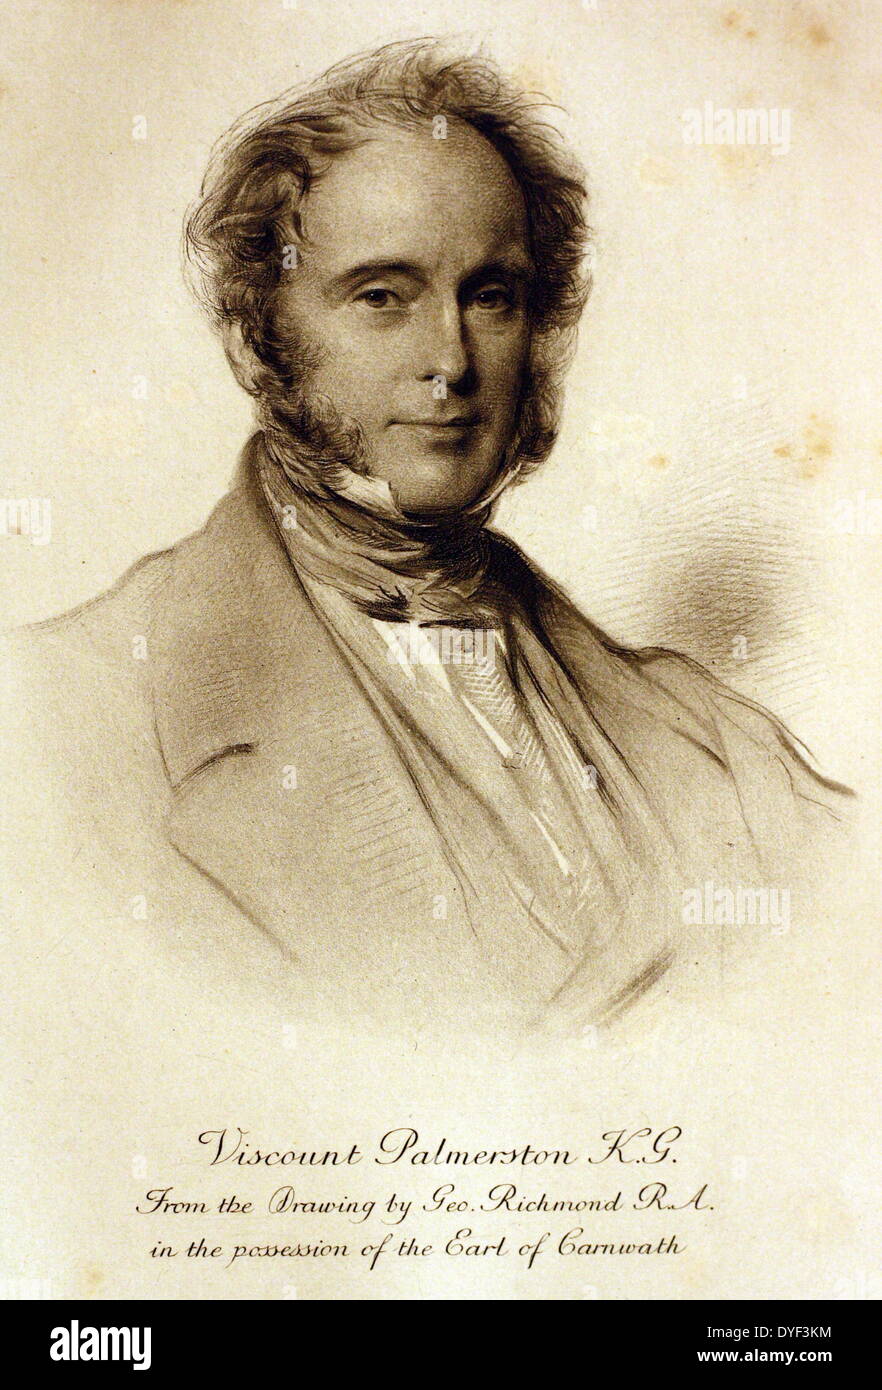 Illustration of Henry John Temple, 3rd Viscount Palmerston, Baron Temple of Mount Temple, Engraved by Emery Walker. Lived between 1784-1865. English Whig-Liberal statesman. Print created from the original painting by G. Richmond. Originally published 1907. Stock Photo